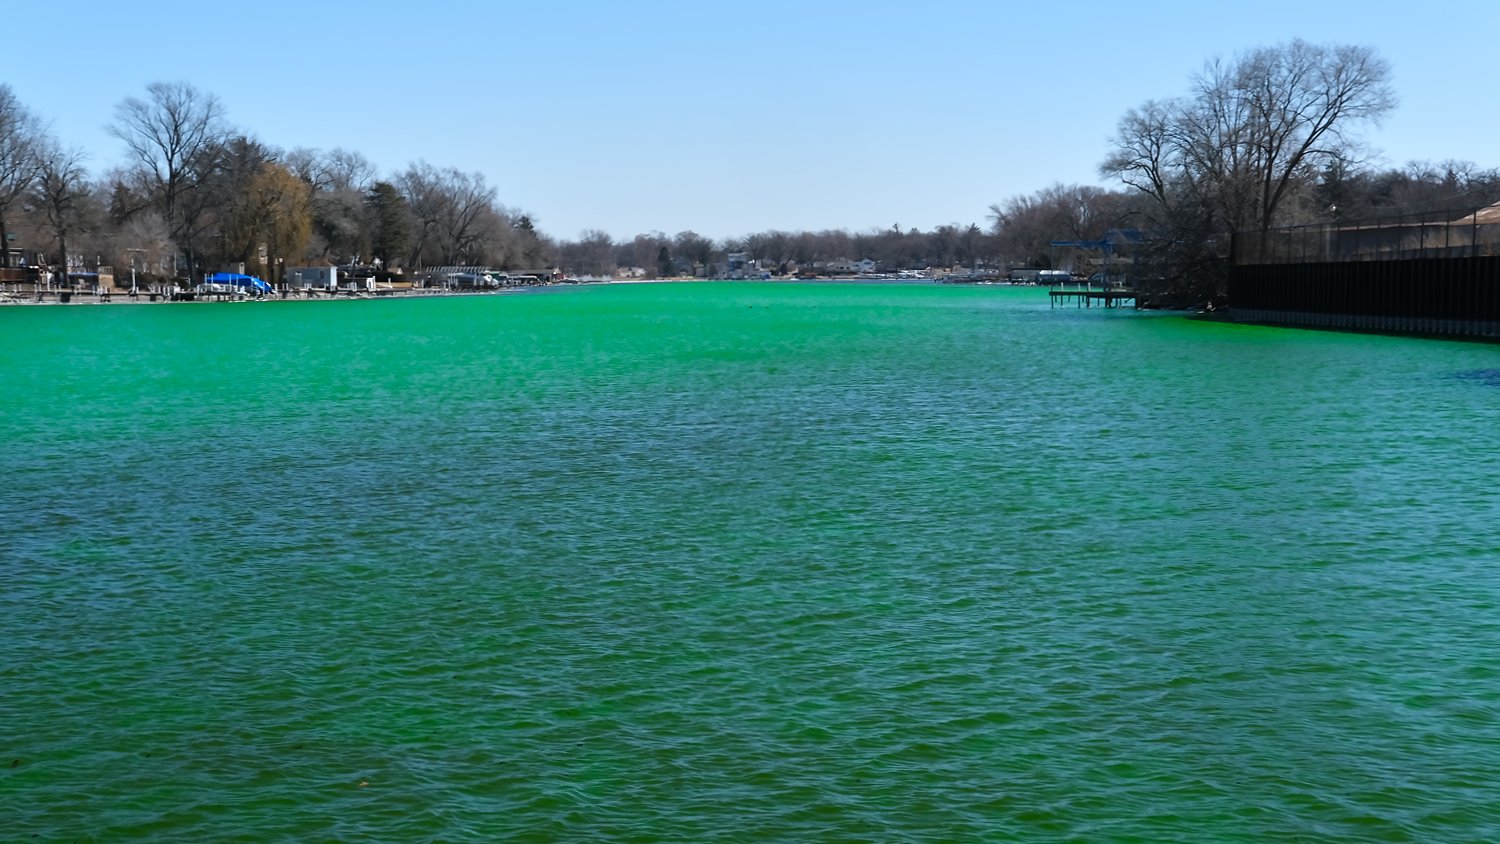 The Fox River dyed green for McHenry Sham-rocks the Fox.